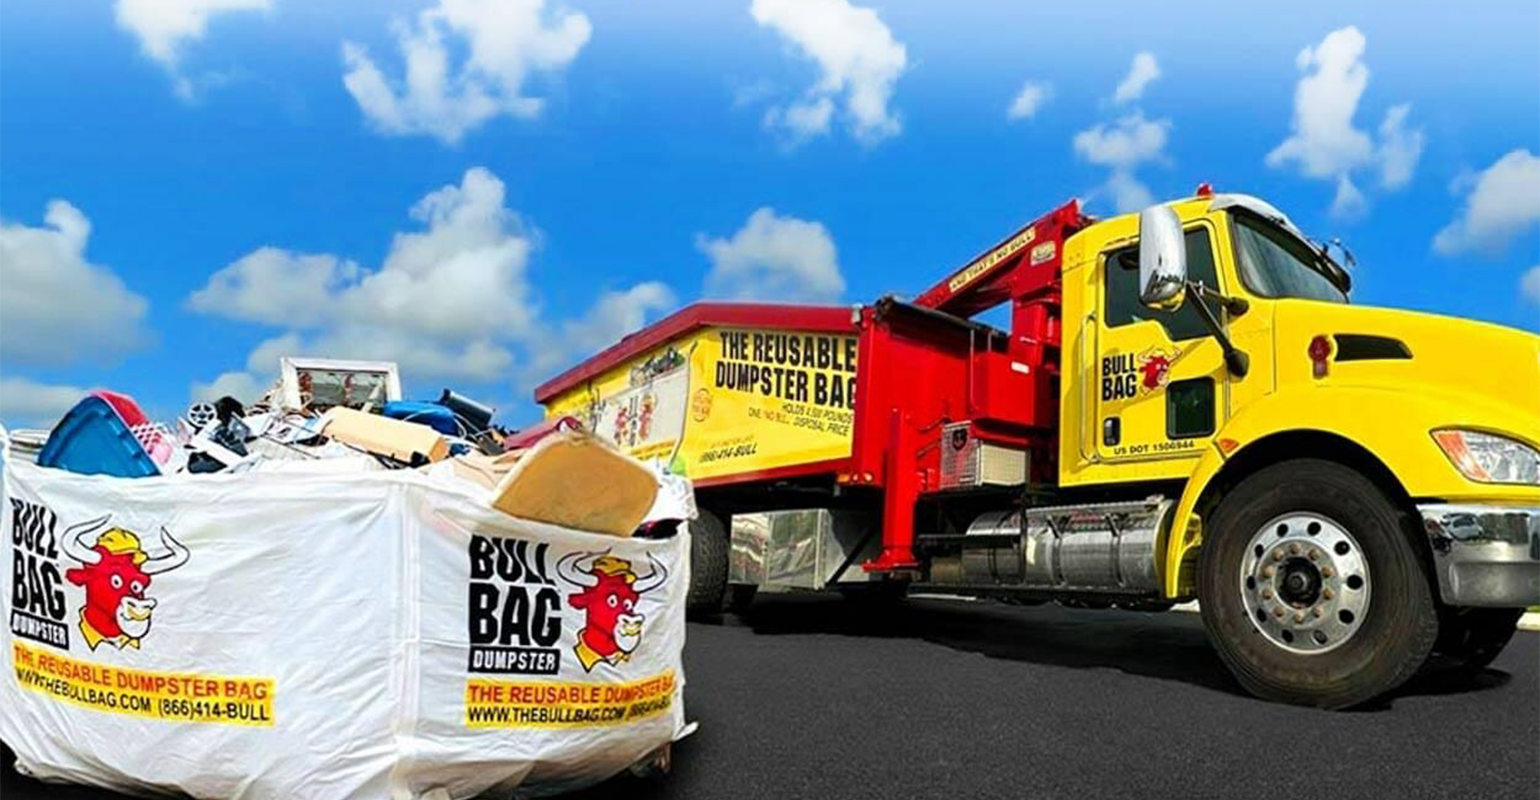 Bagster vs. Dumpster: Which Is Better? - Sourgum Waste